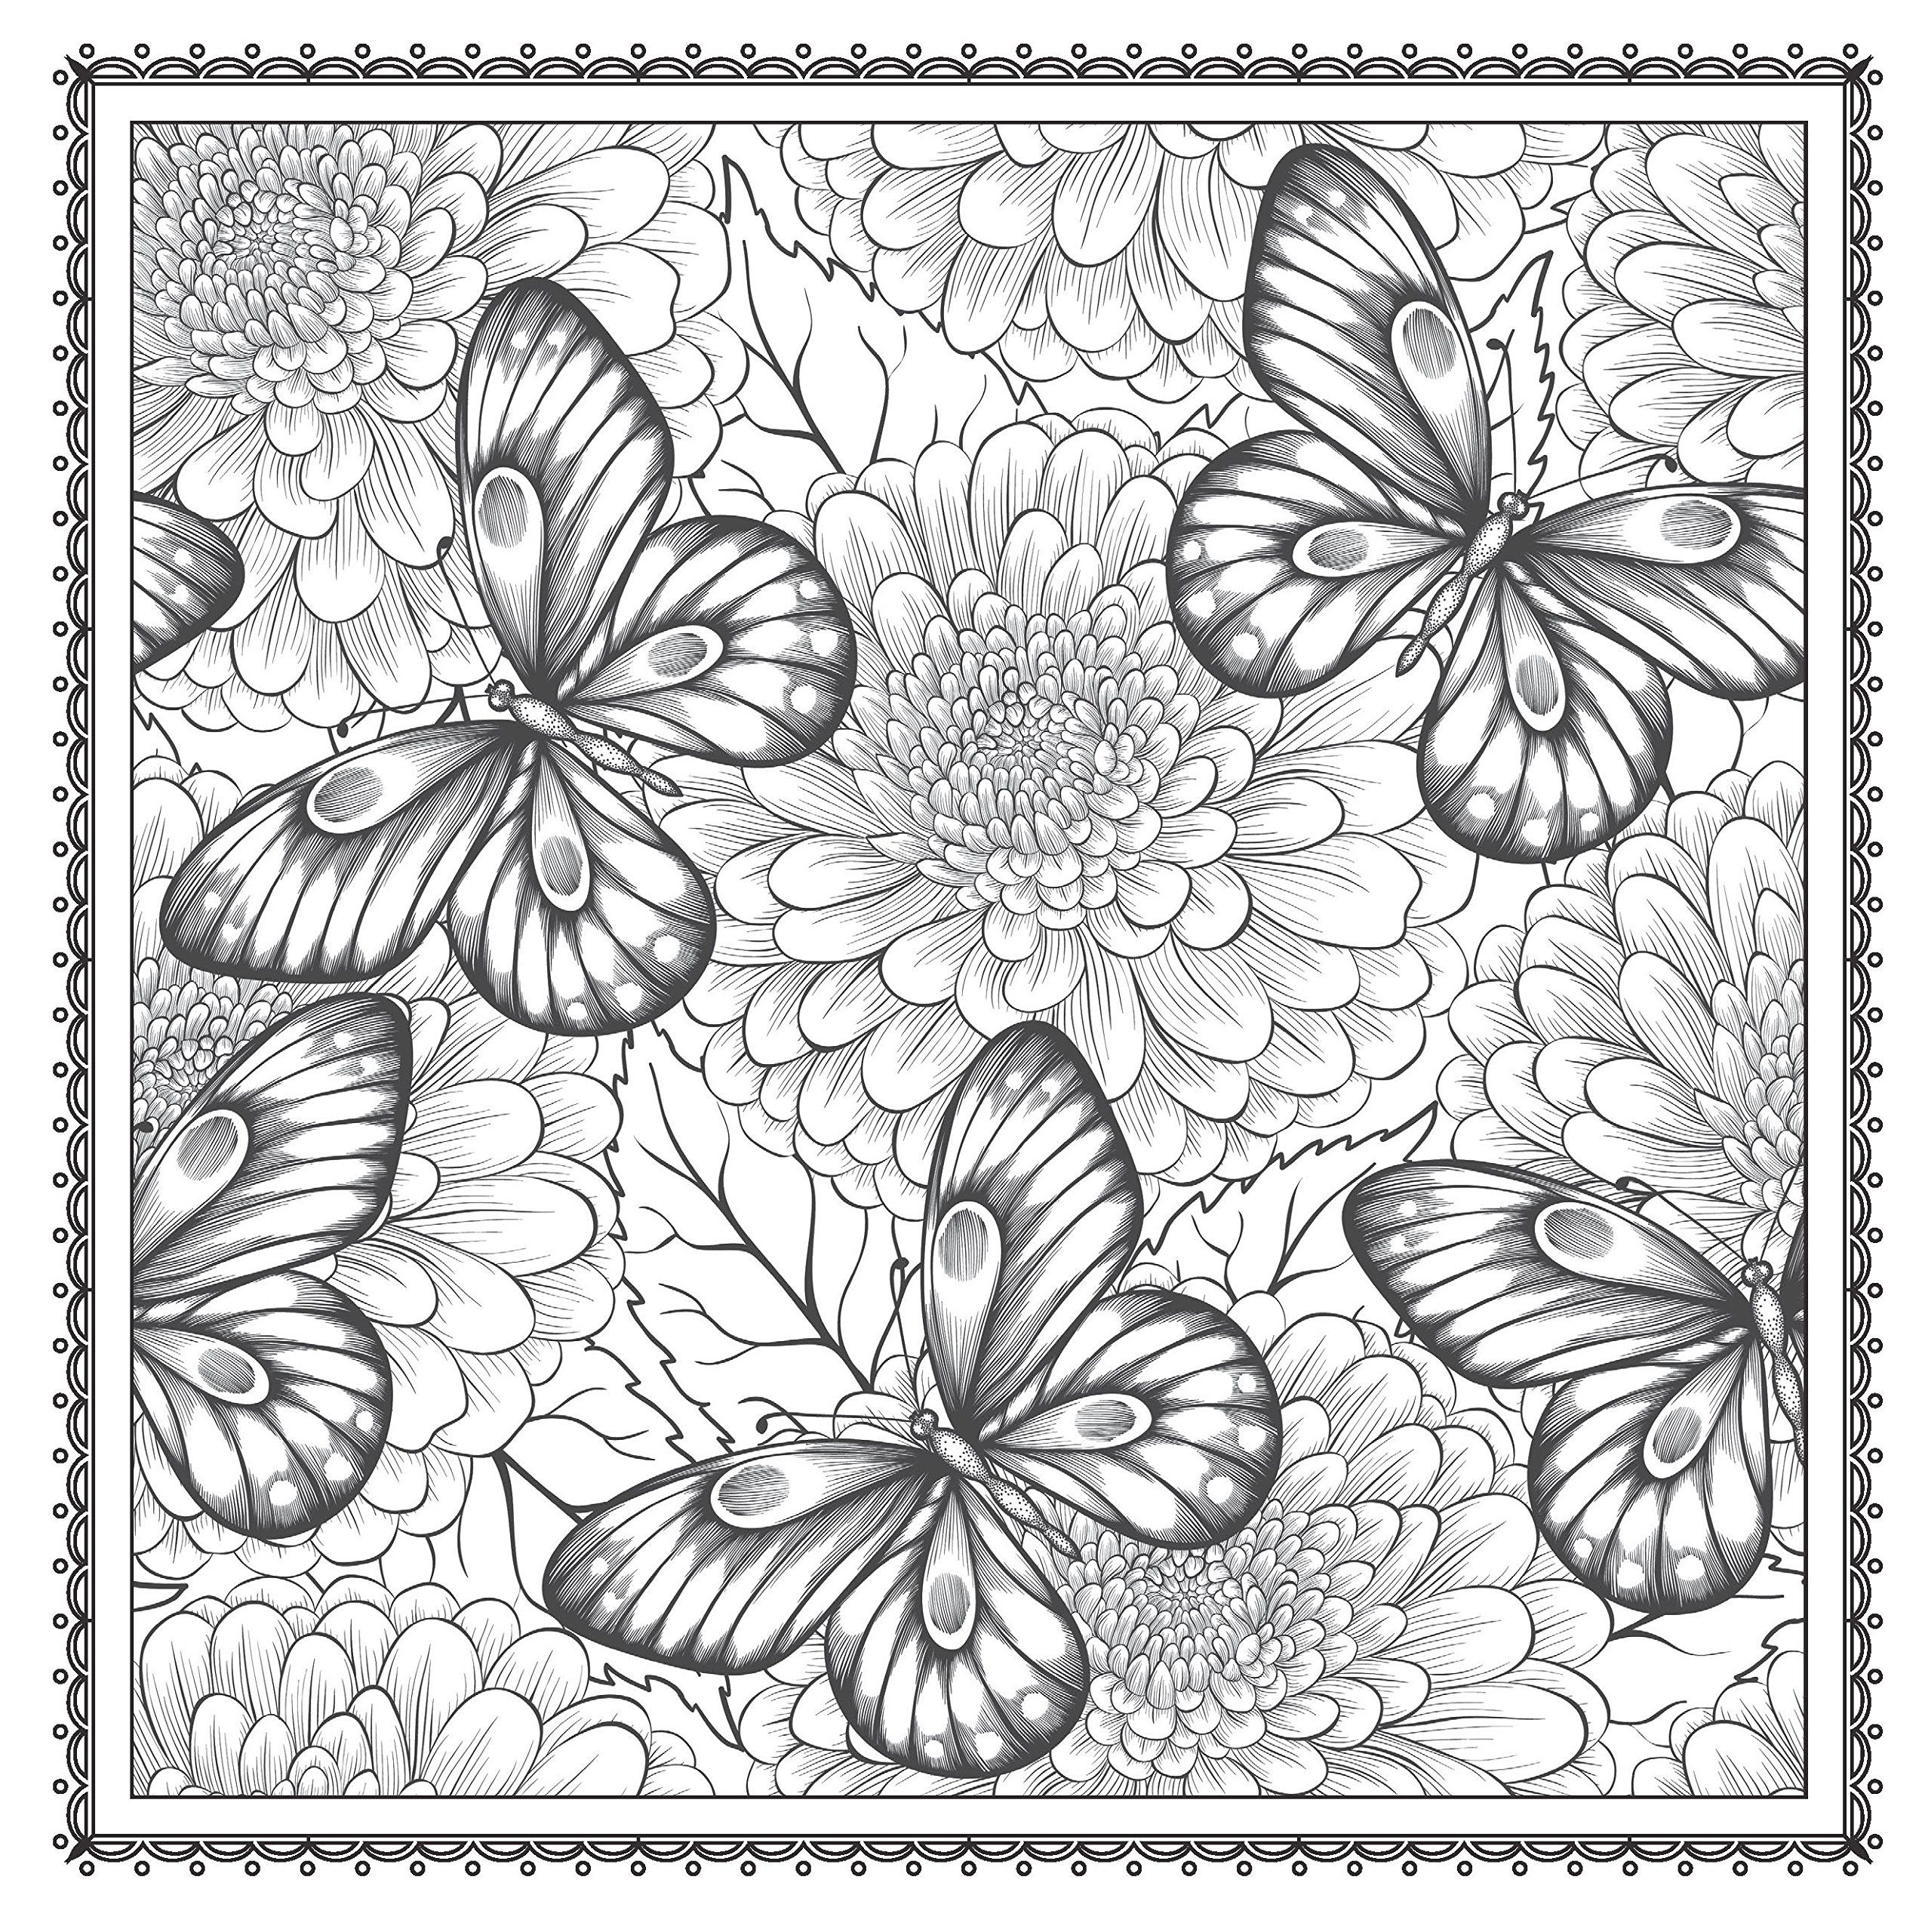 free-adult-coloring-pages-patterns-download-free-adult-coloring-pages